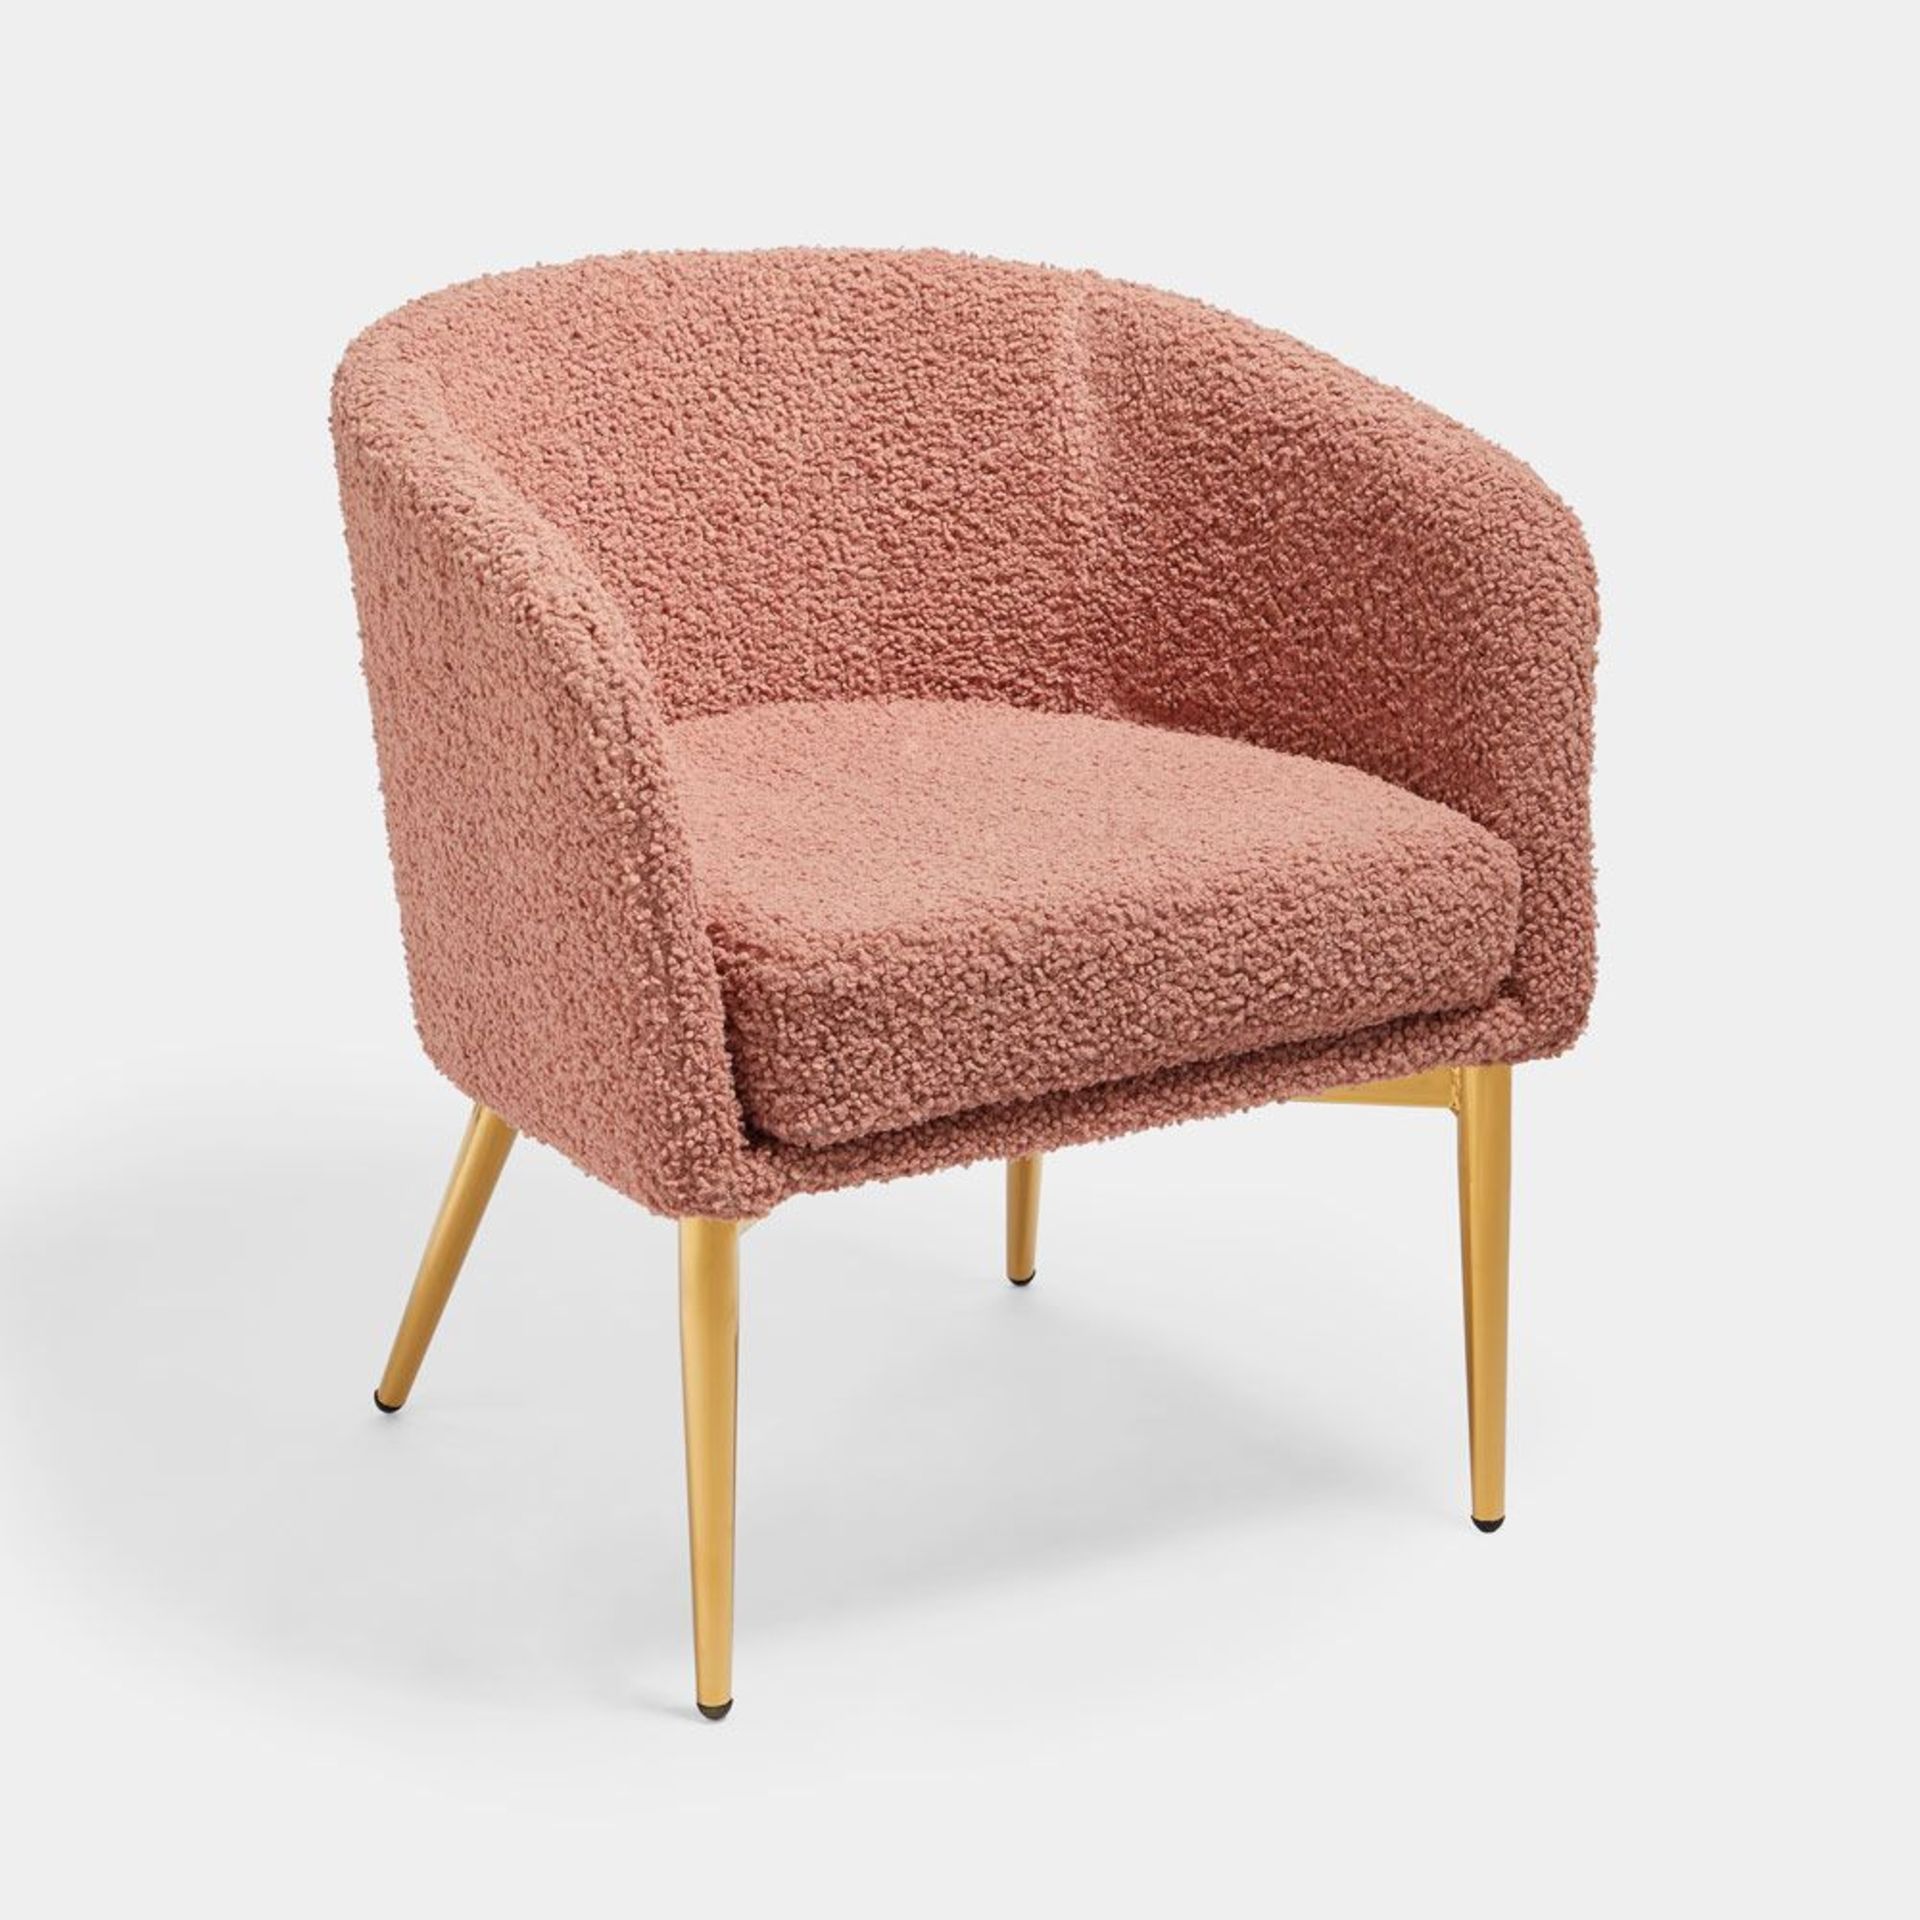 Teddy Pink Accent Chair. Settle down into a comfy chair at the end of a long day. Made of the